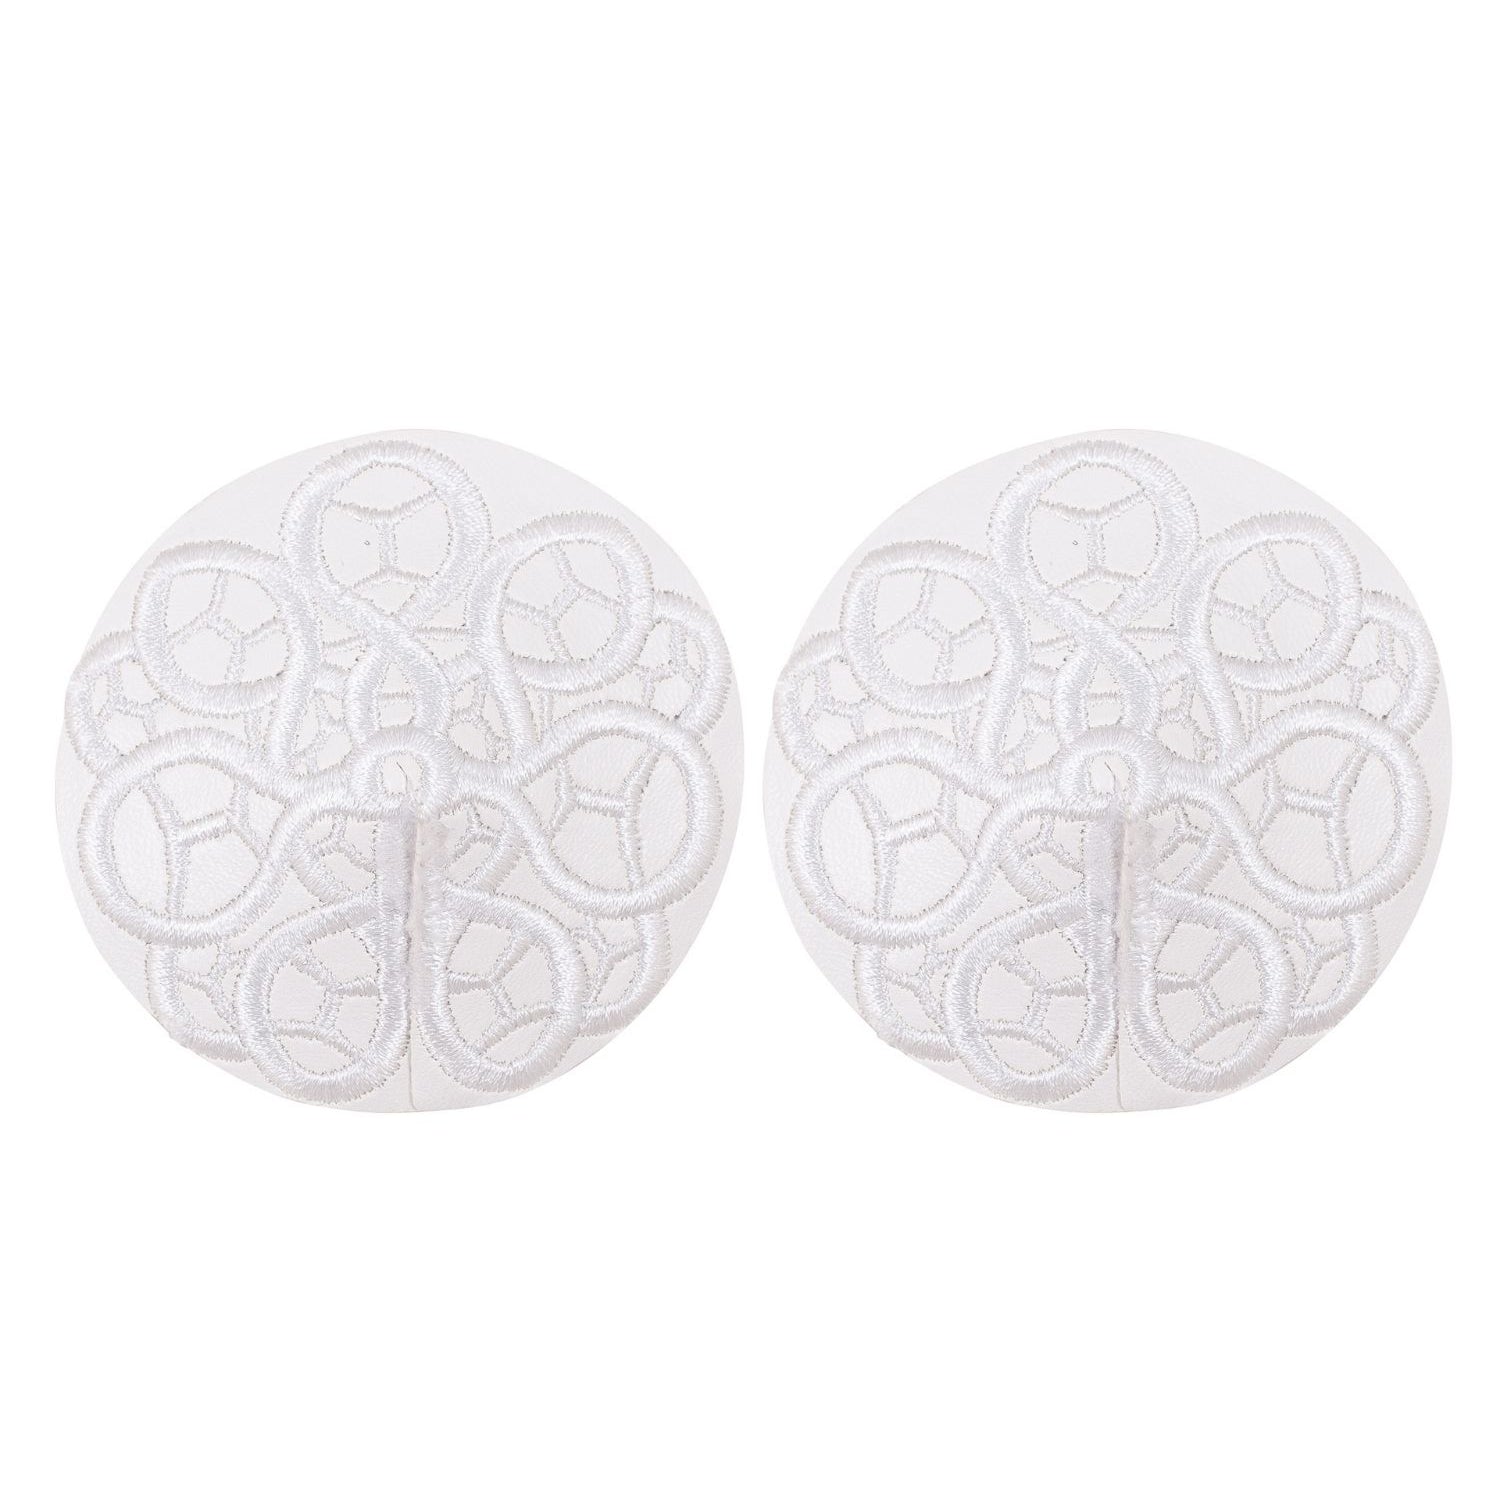 Bluebella Tallulah Nipplets - Nipple Pasties - White Embroidery Details - Sexy Lingerie Accessories